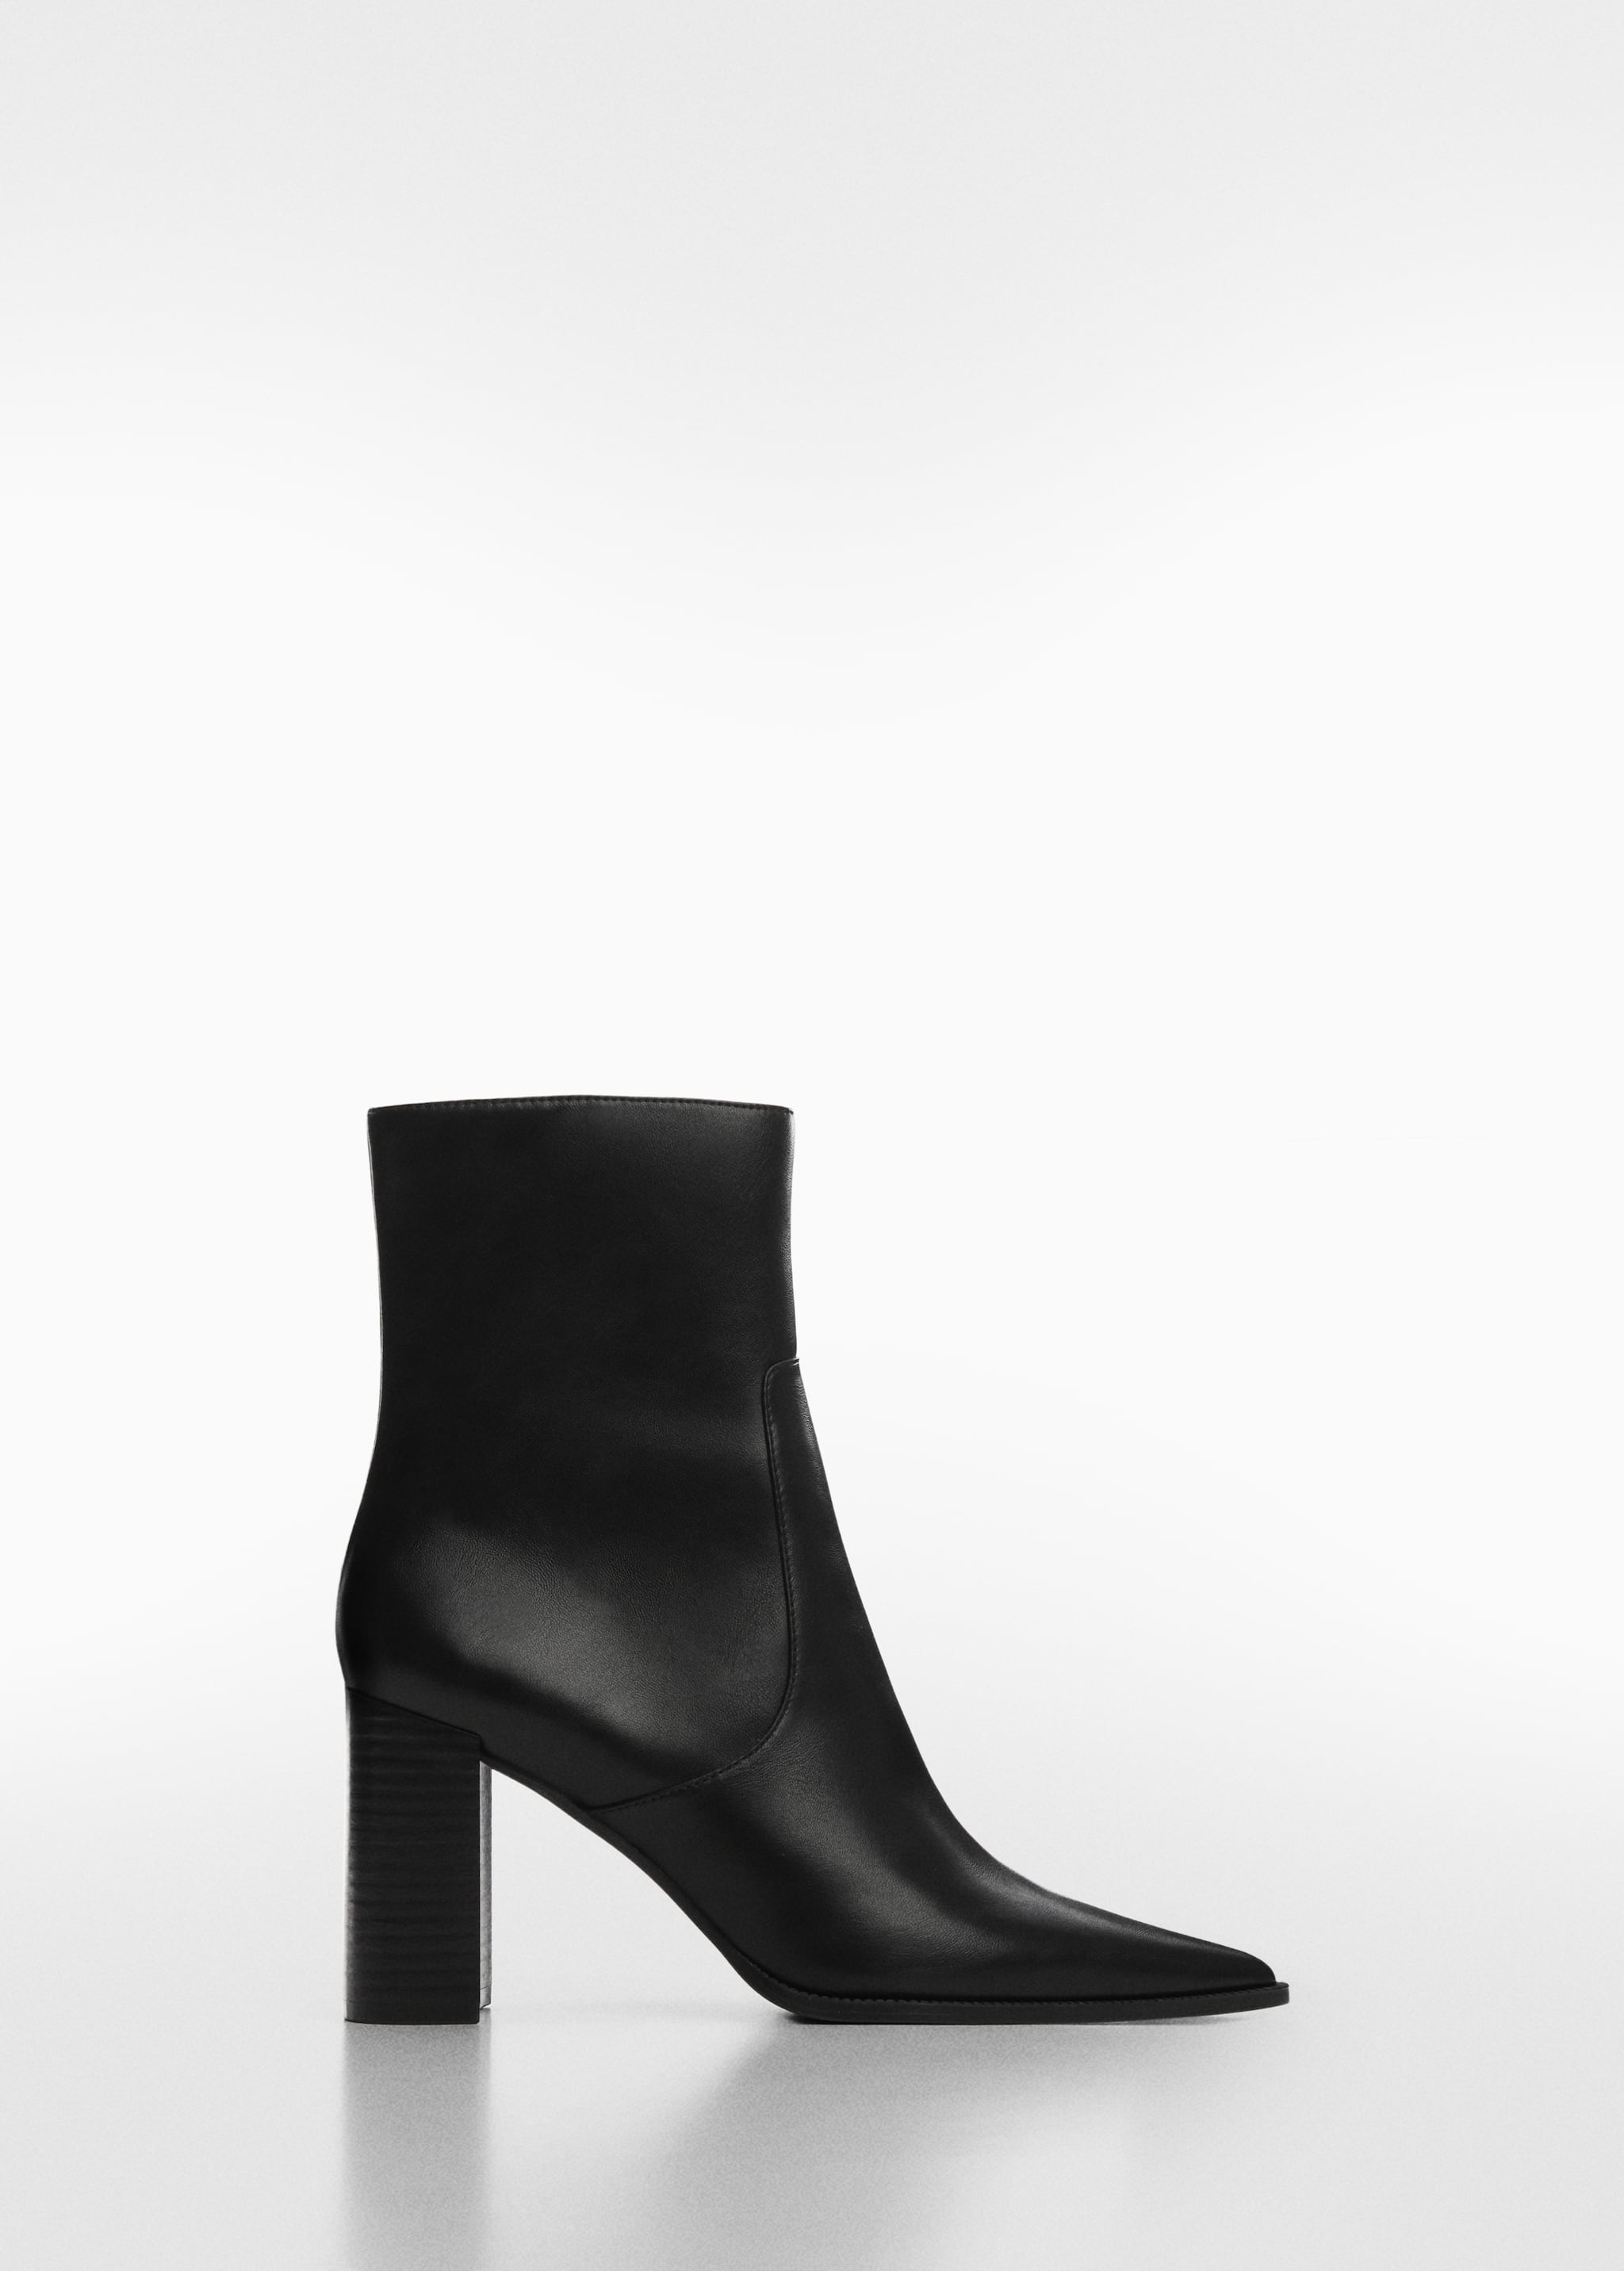 Pointed heel ankle boot - Article without model